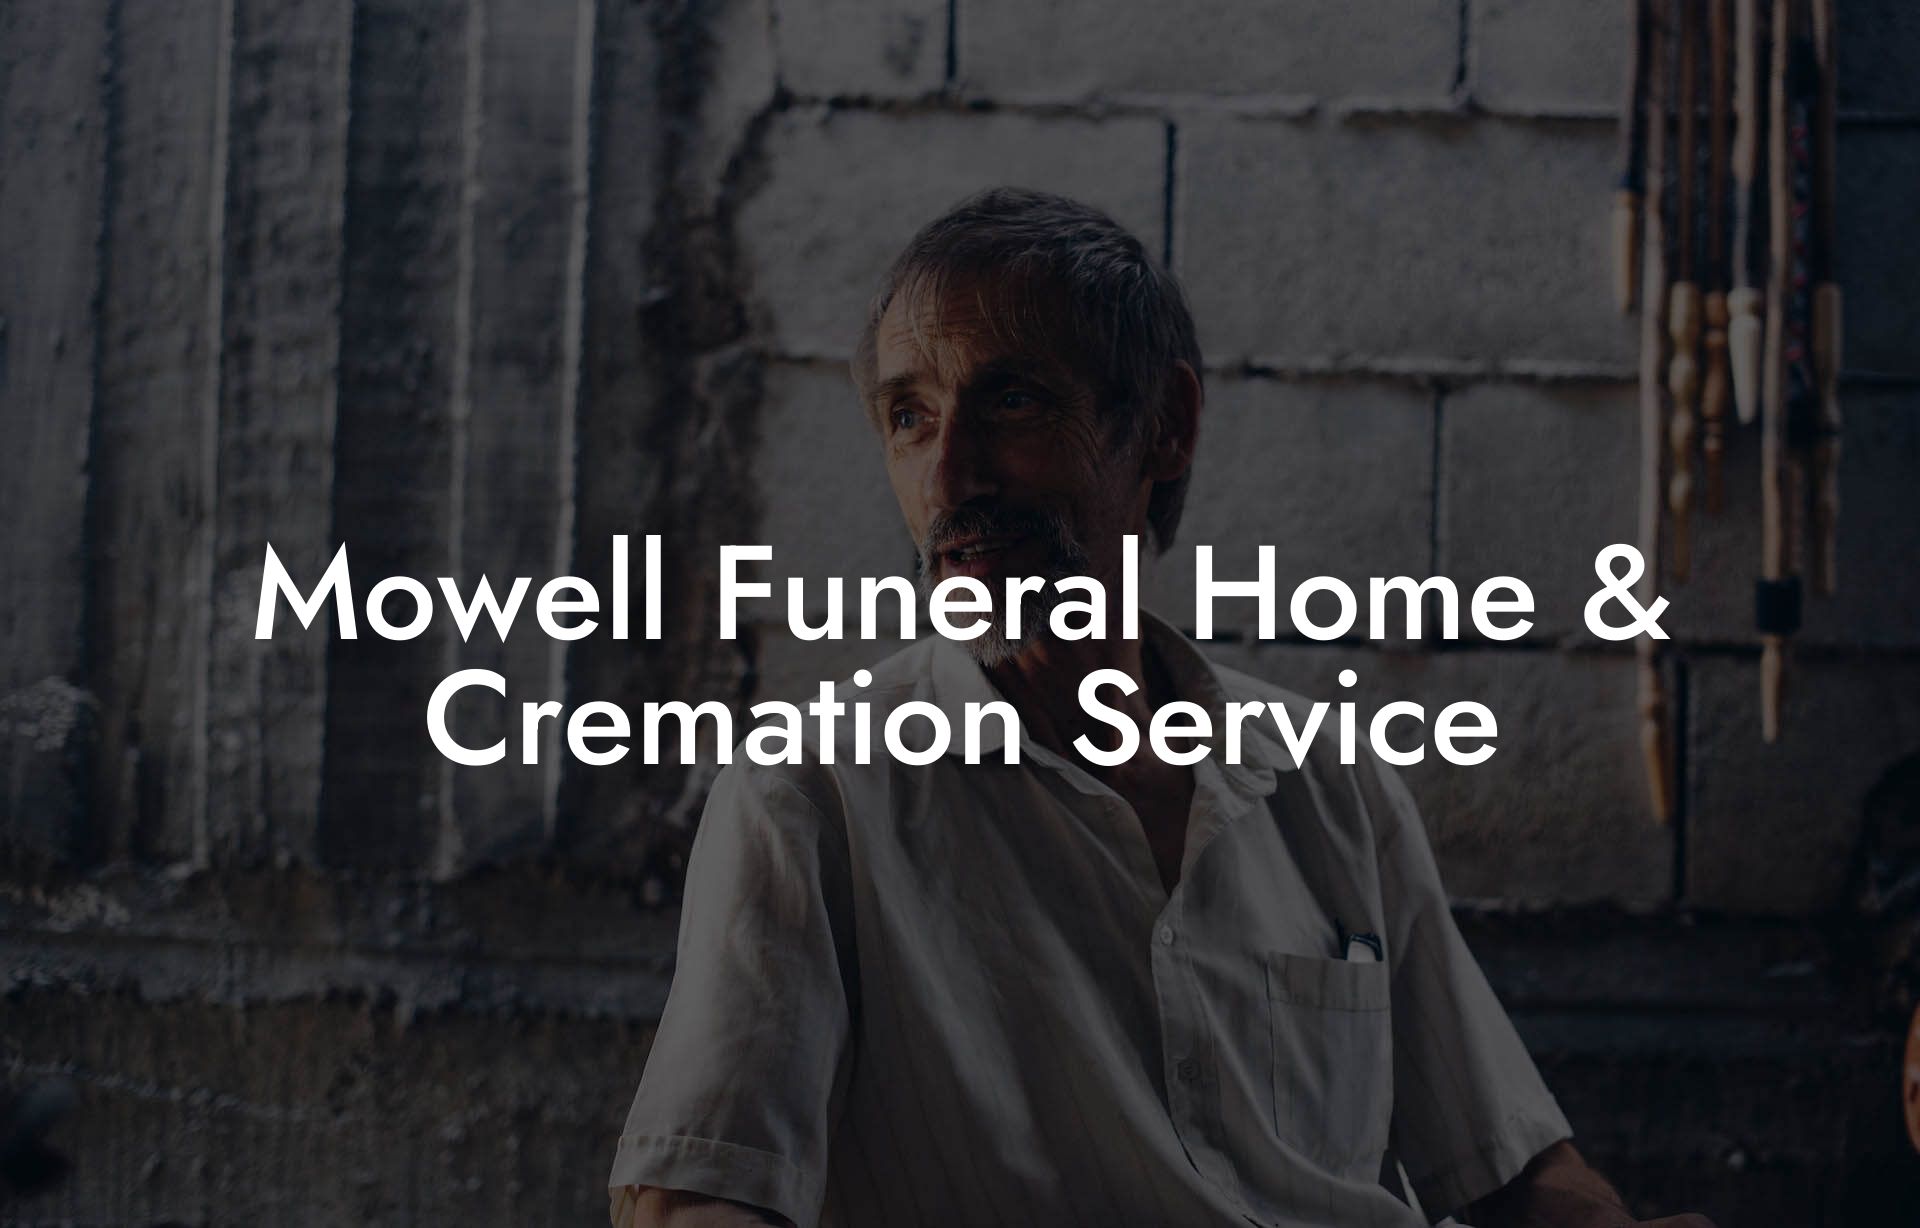 Mowell Funeral Home & Cremation Service